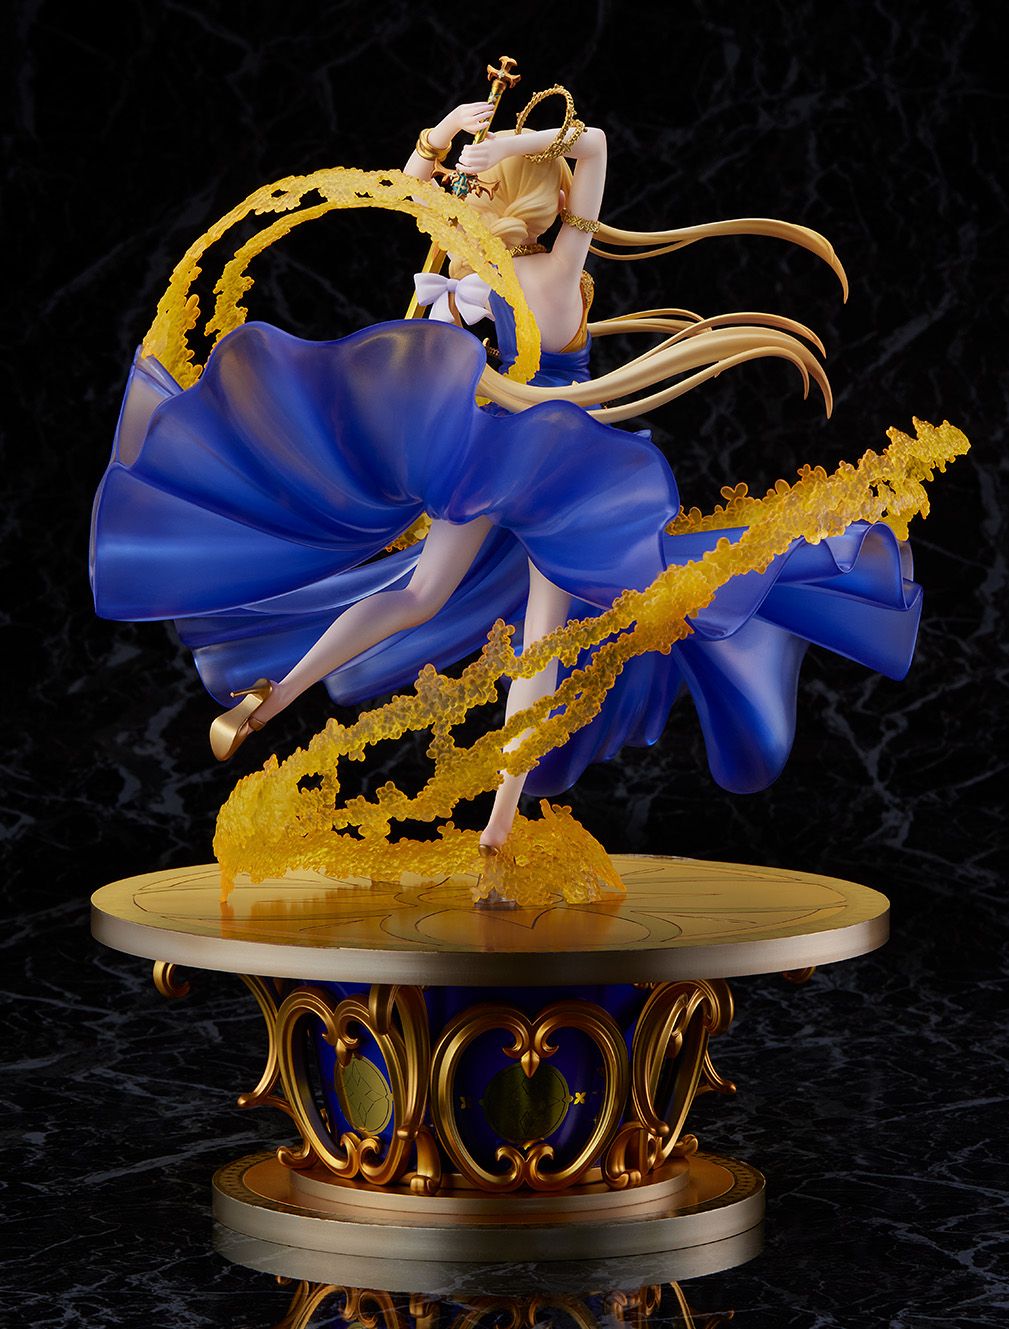 Alice Synthesis Thirty Crystal Dress Ver. The Fragrant Olive Sword 1/7 Scale Figure SAO Sword Art Online SHIBUYA SCRANBLE FIGURE